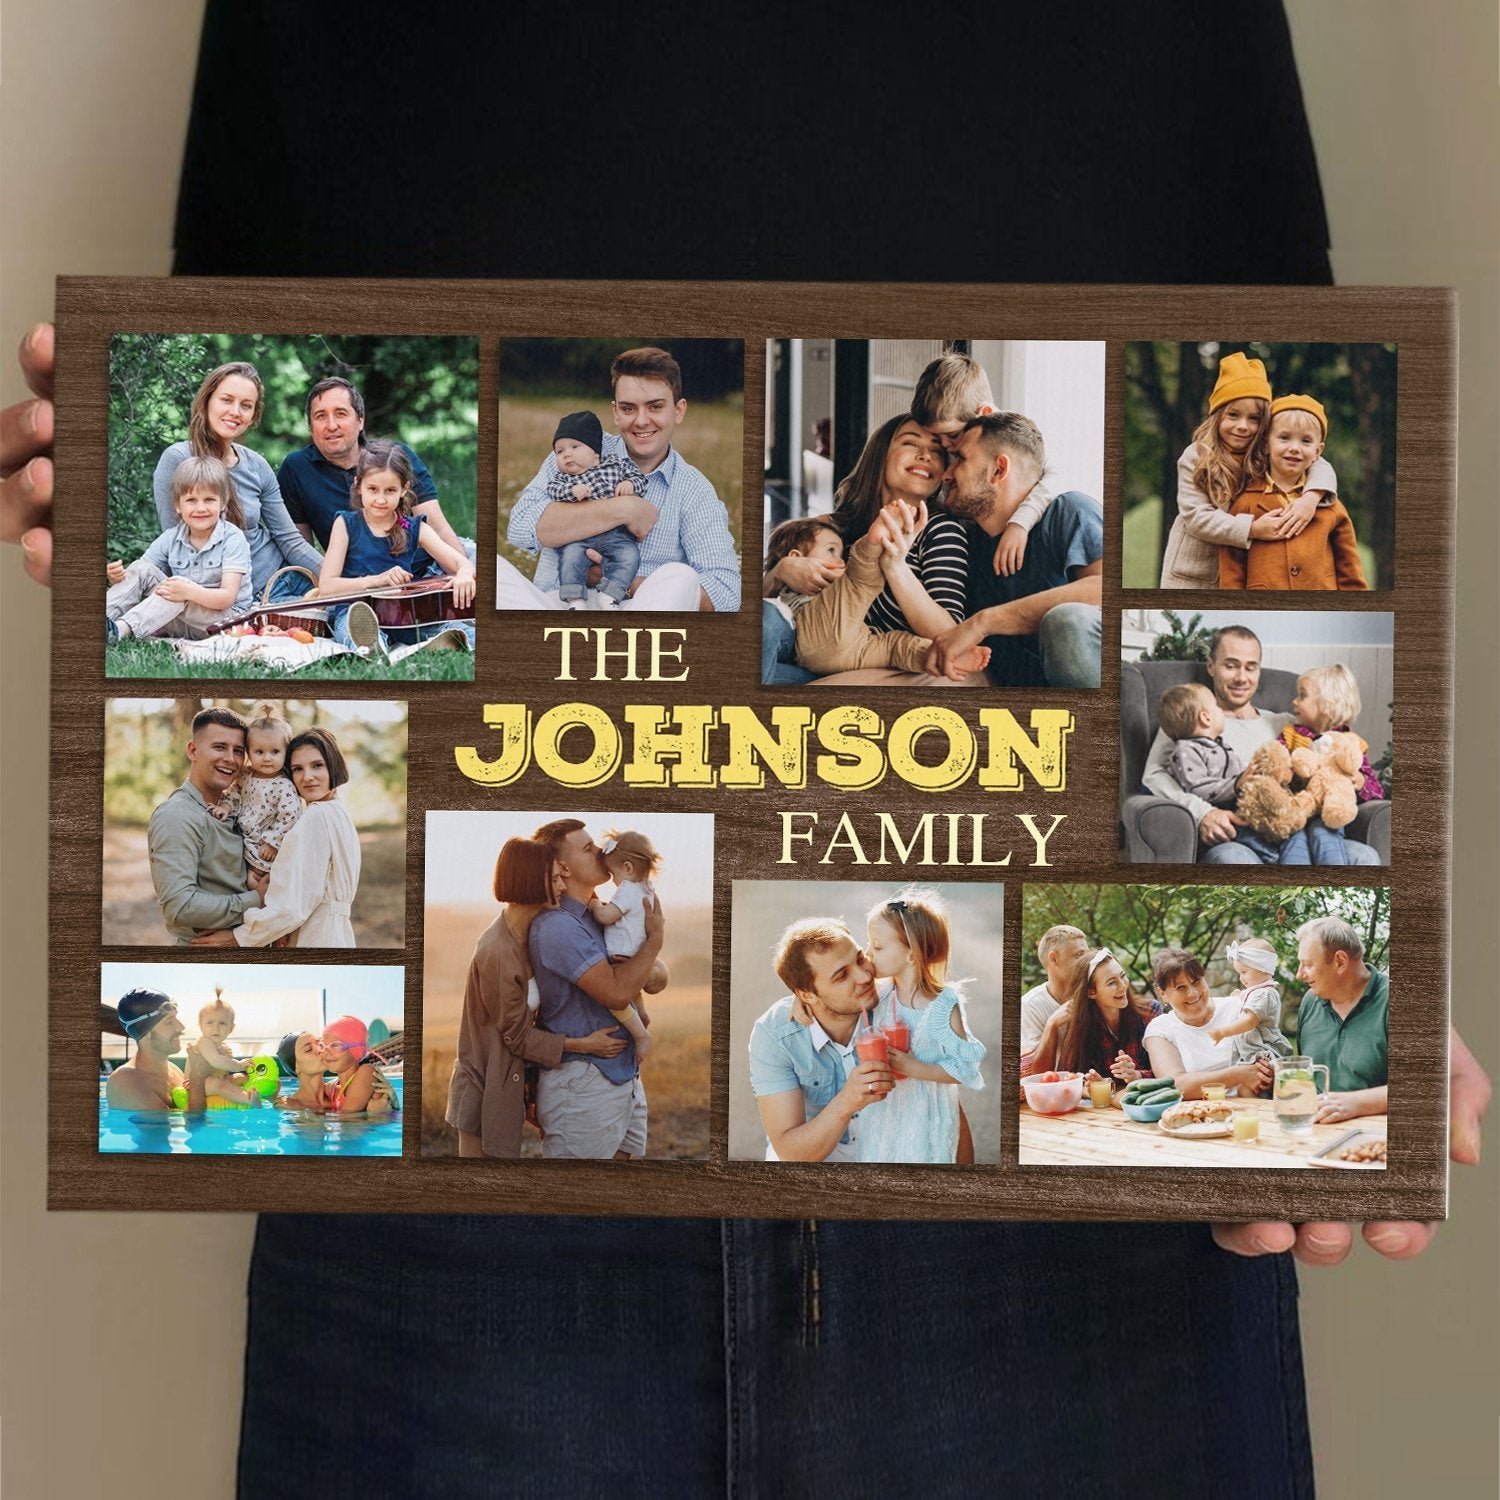 Your grandparents’ walls are empty and they’re in trouble to find suitable family wall decor. Do not worry. This Custom Family Photo Wall Art will bring their home a cozy atmosphere. It would look great in the living room, bedroom, or kitchen. What a meaningful gift for your grandparents!